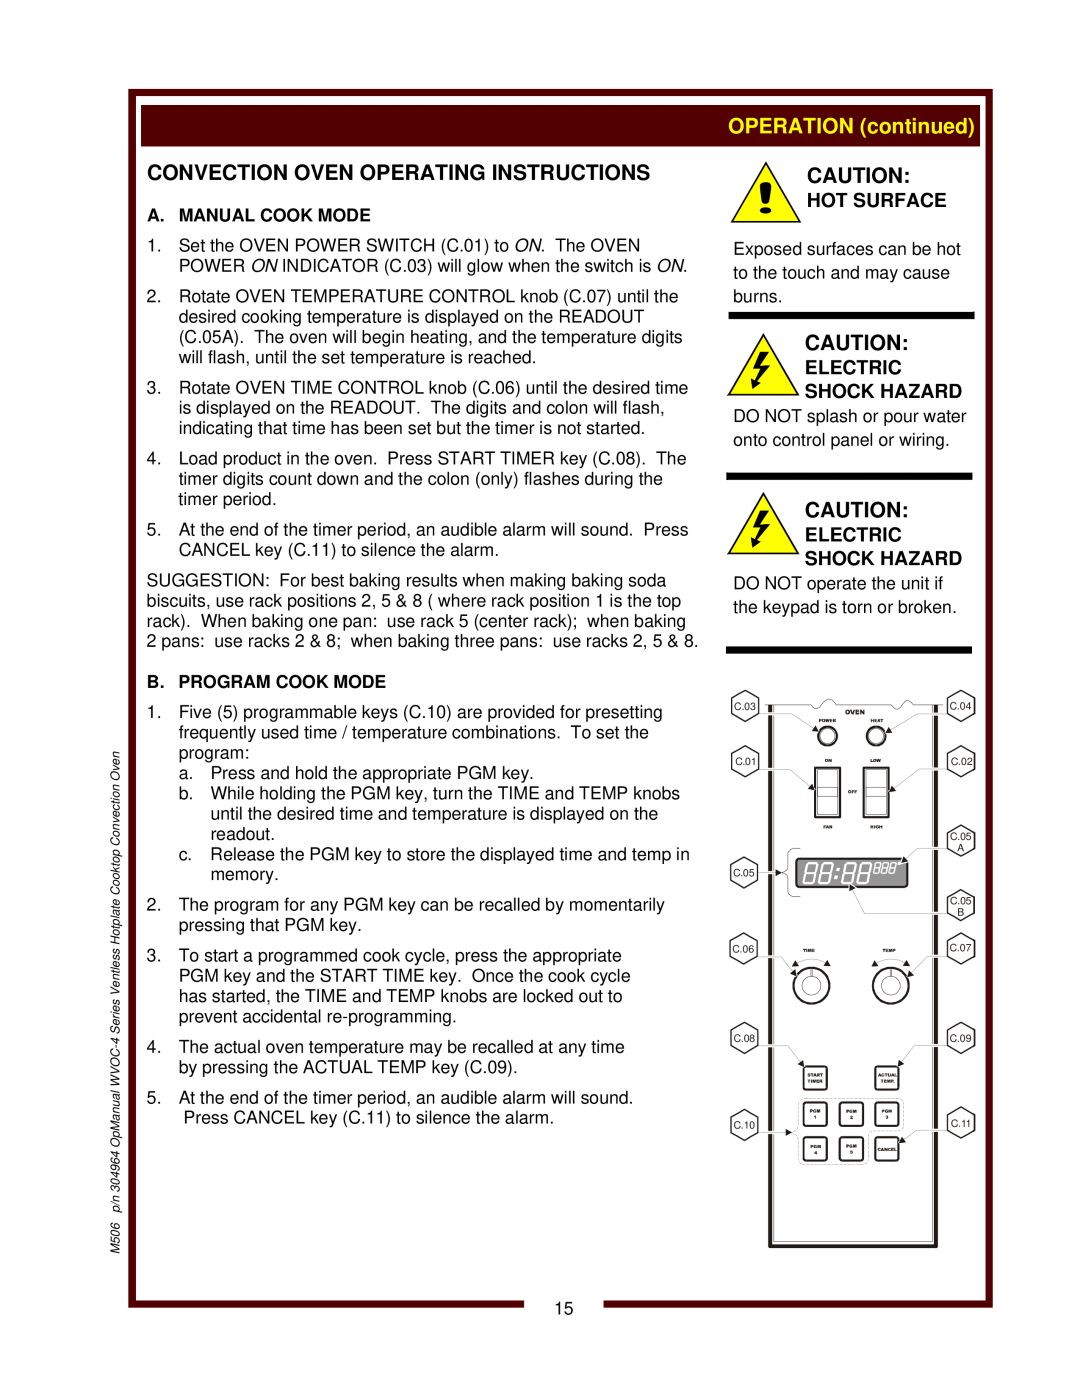 Wells WVOC-4HS Convection Oven Operating Instructions, OPERATION continued, Hot Surface, Electric Shock Hazard 